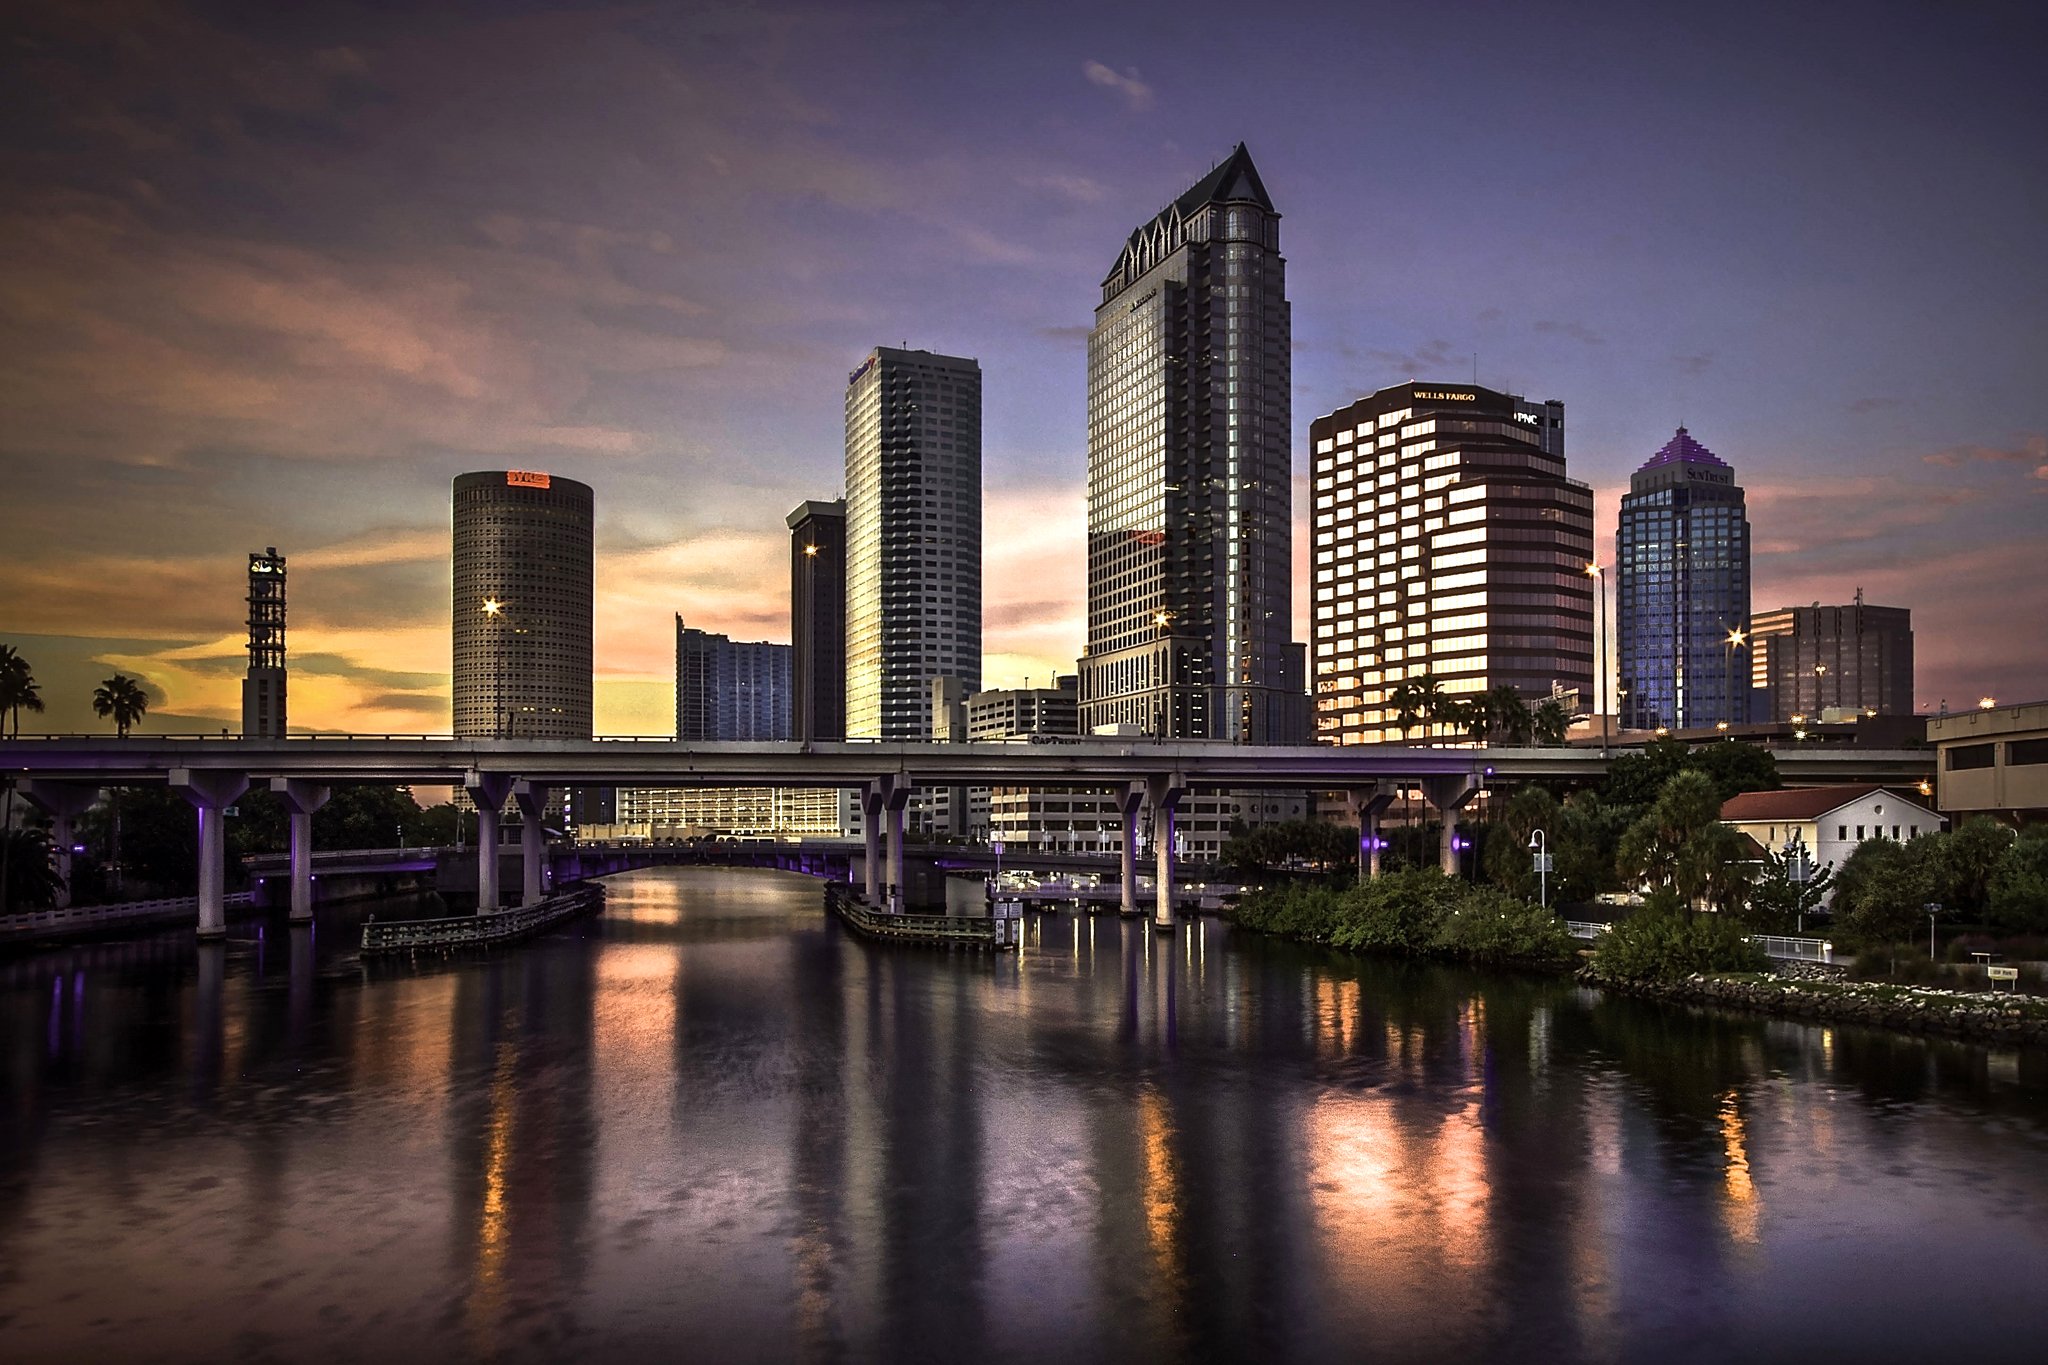 usa, Houses, Rivers, Bridges, Tampa, Cities Wallpapers HD / Desktop and